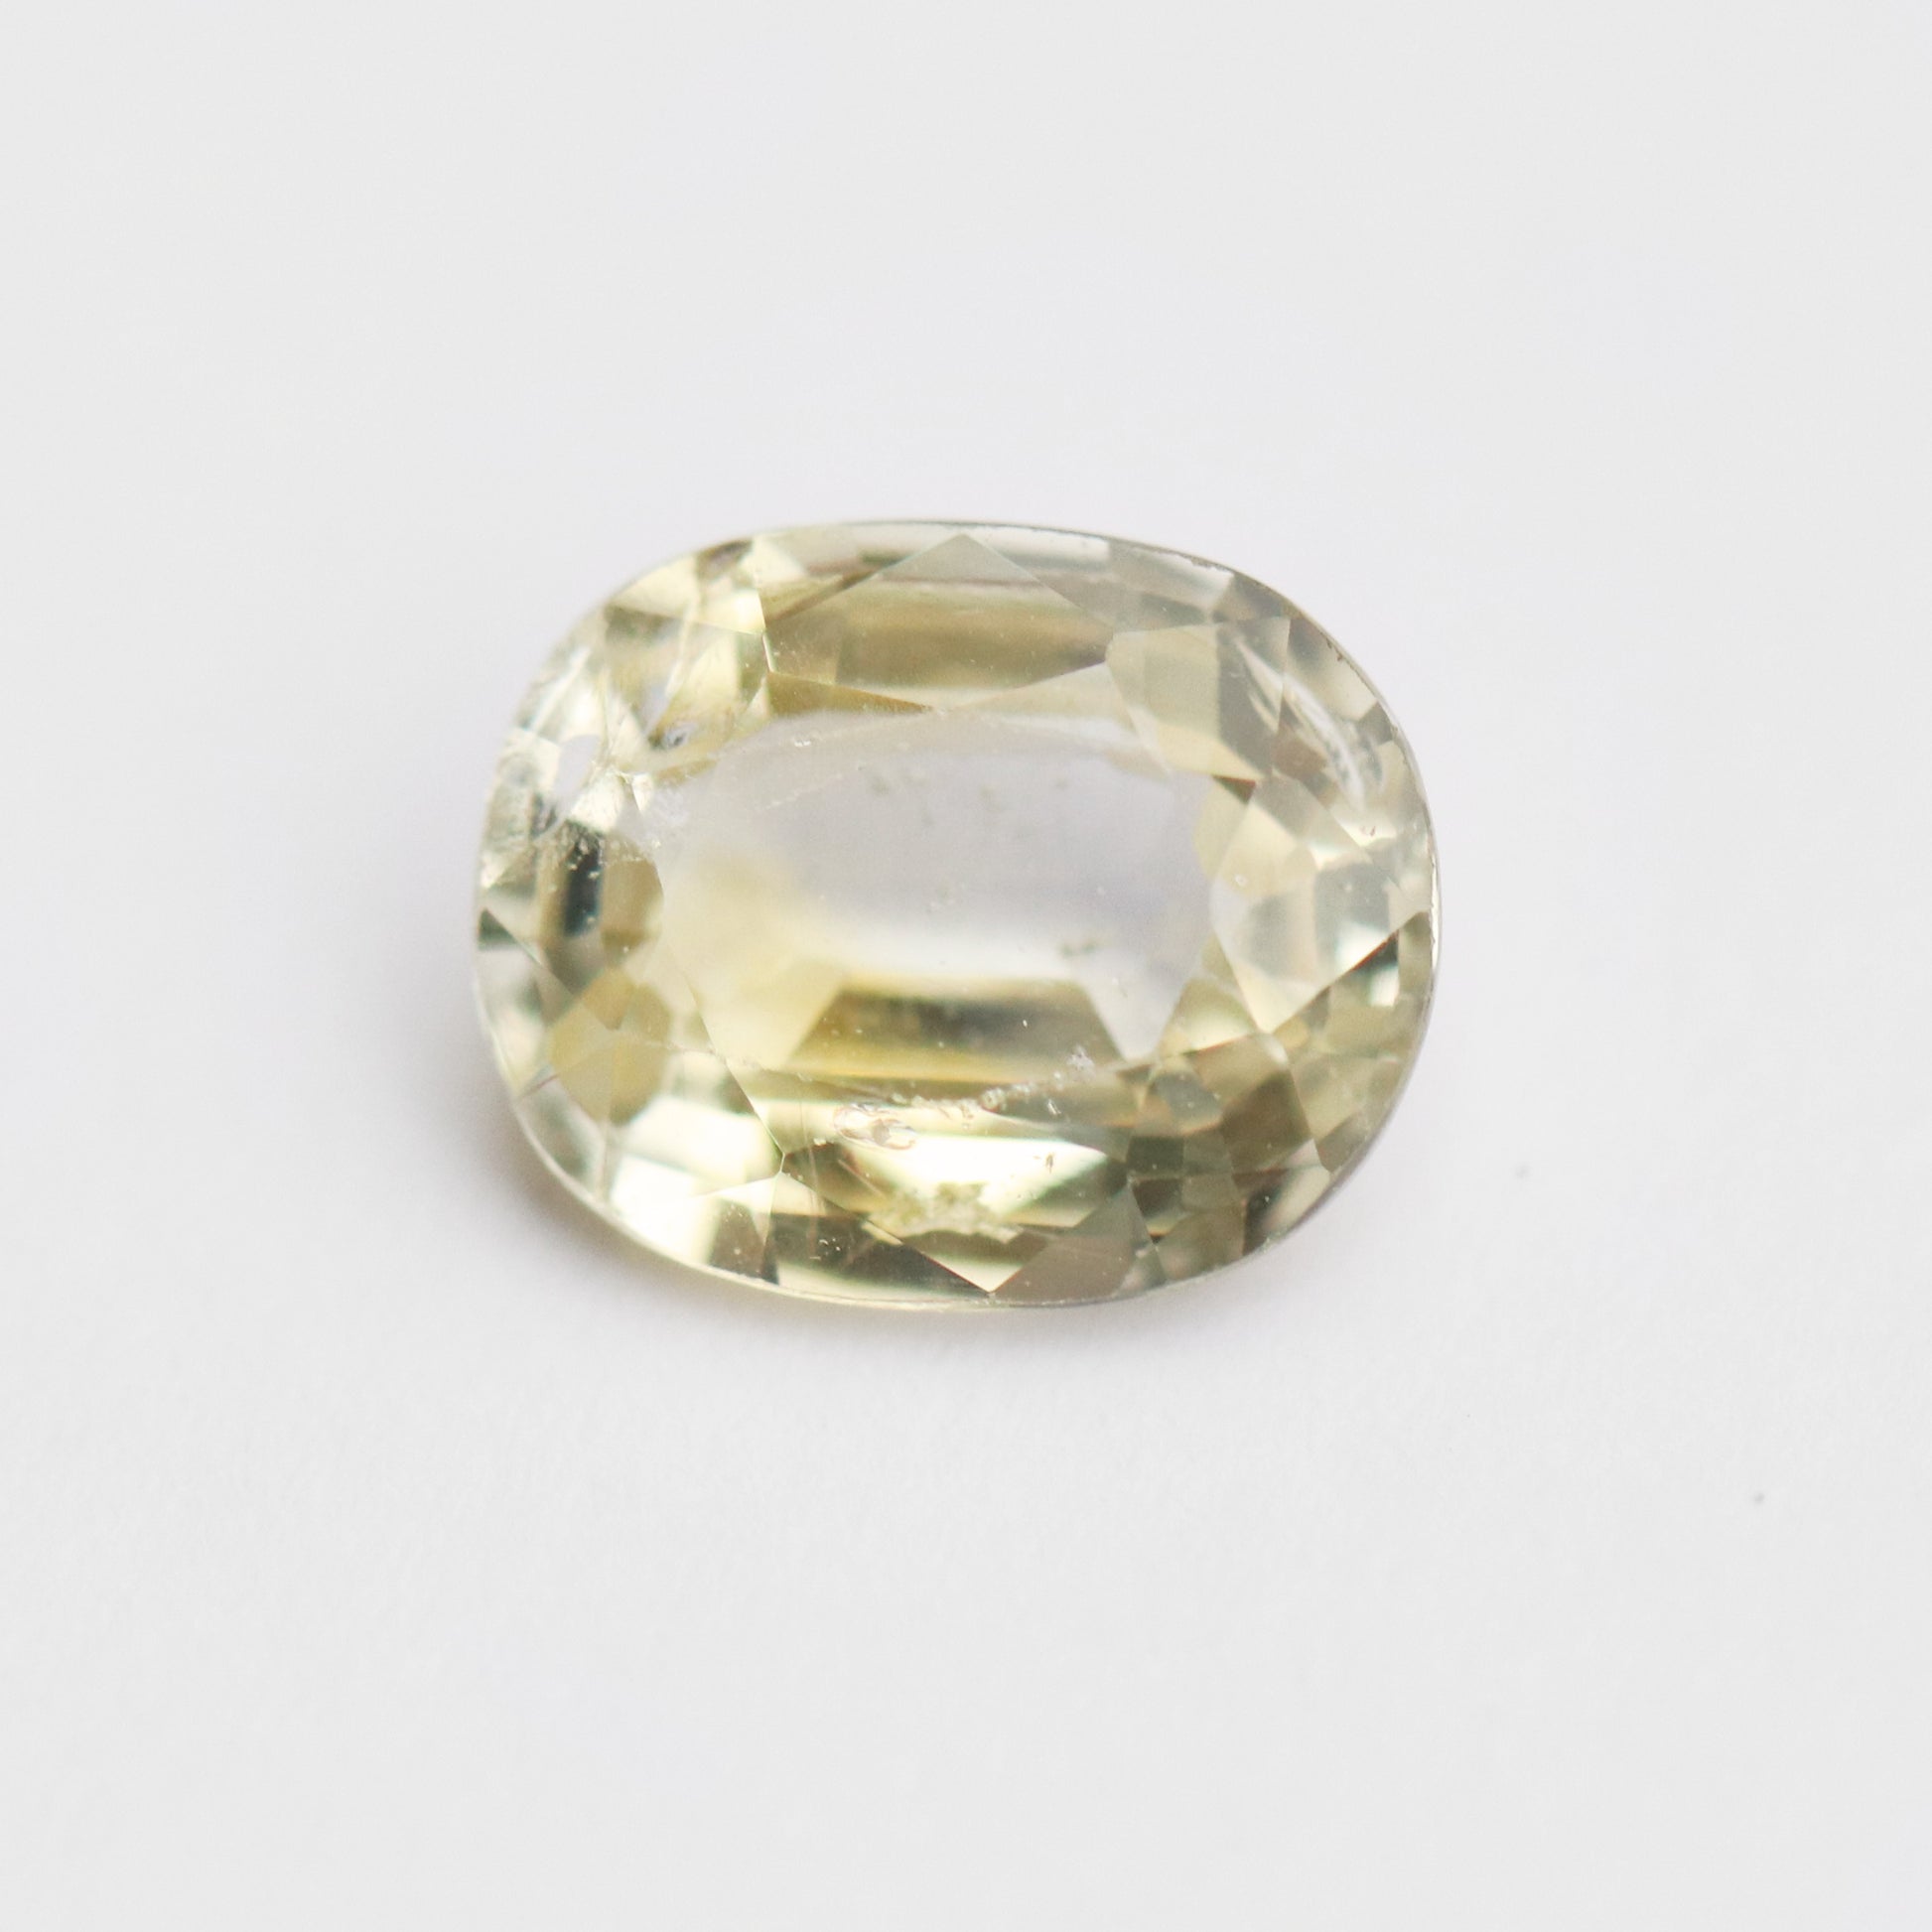 1.19 carat oval cushion cut yellow champagne Sapphire - custom work - inventory code: YSO119 - Midwinter Co. Alternative Bridal Rings and Modern Fine Jewelry